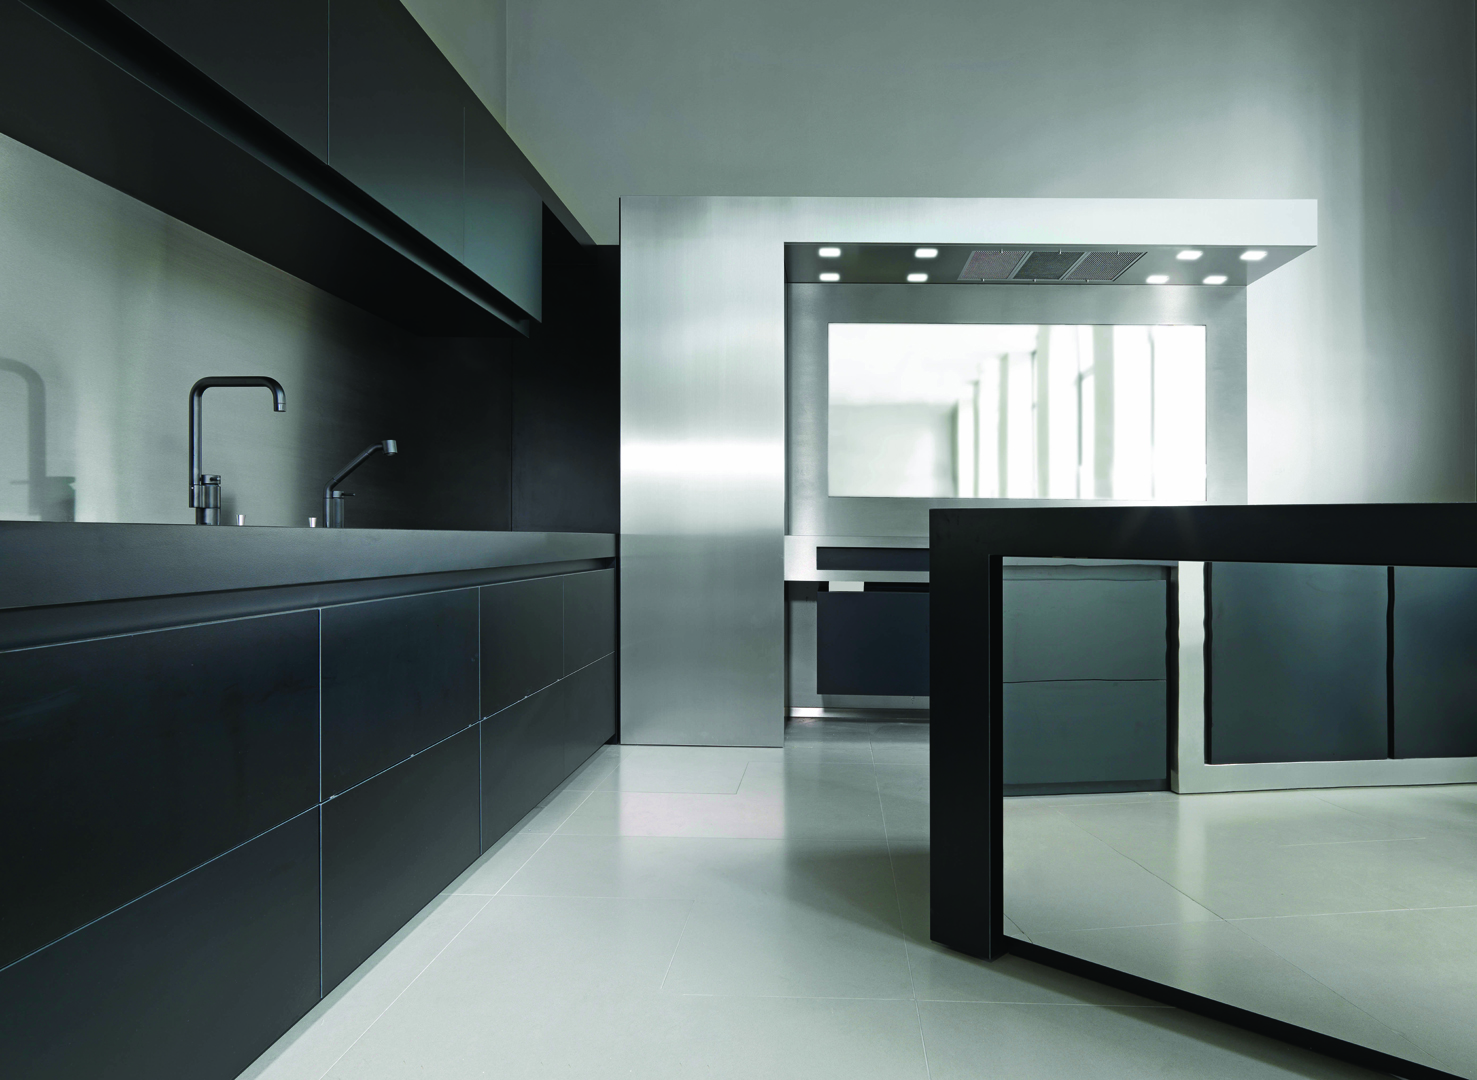 Strato_design_Non-Plus-Ultra_bespoke-kitchen-project-in-Milano-with-turning-kitchen-island_Stratocolor-black_stone_mat-and-mirror-stainless-steel_2009_07